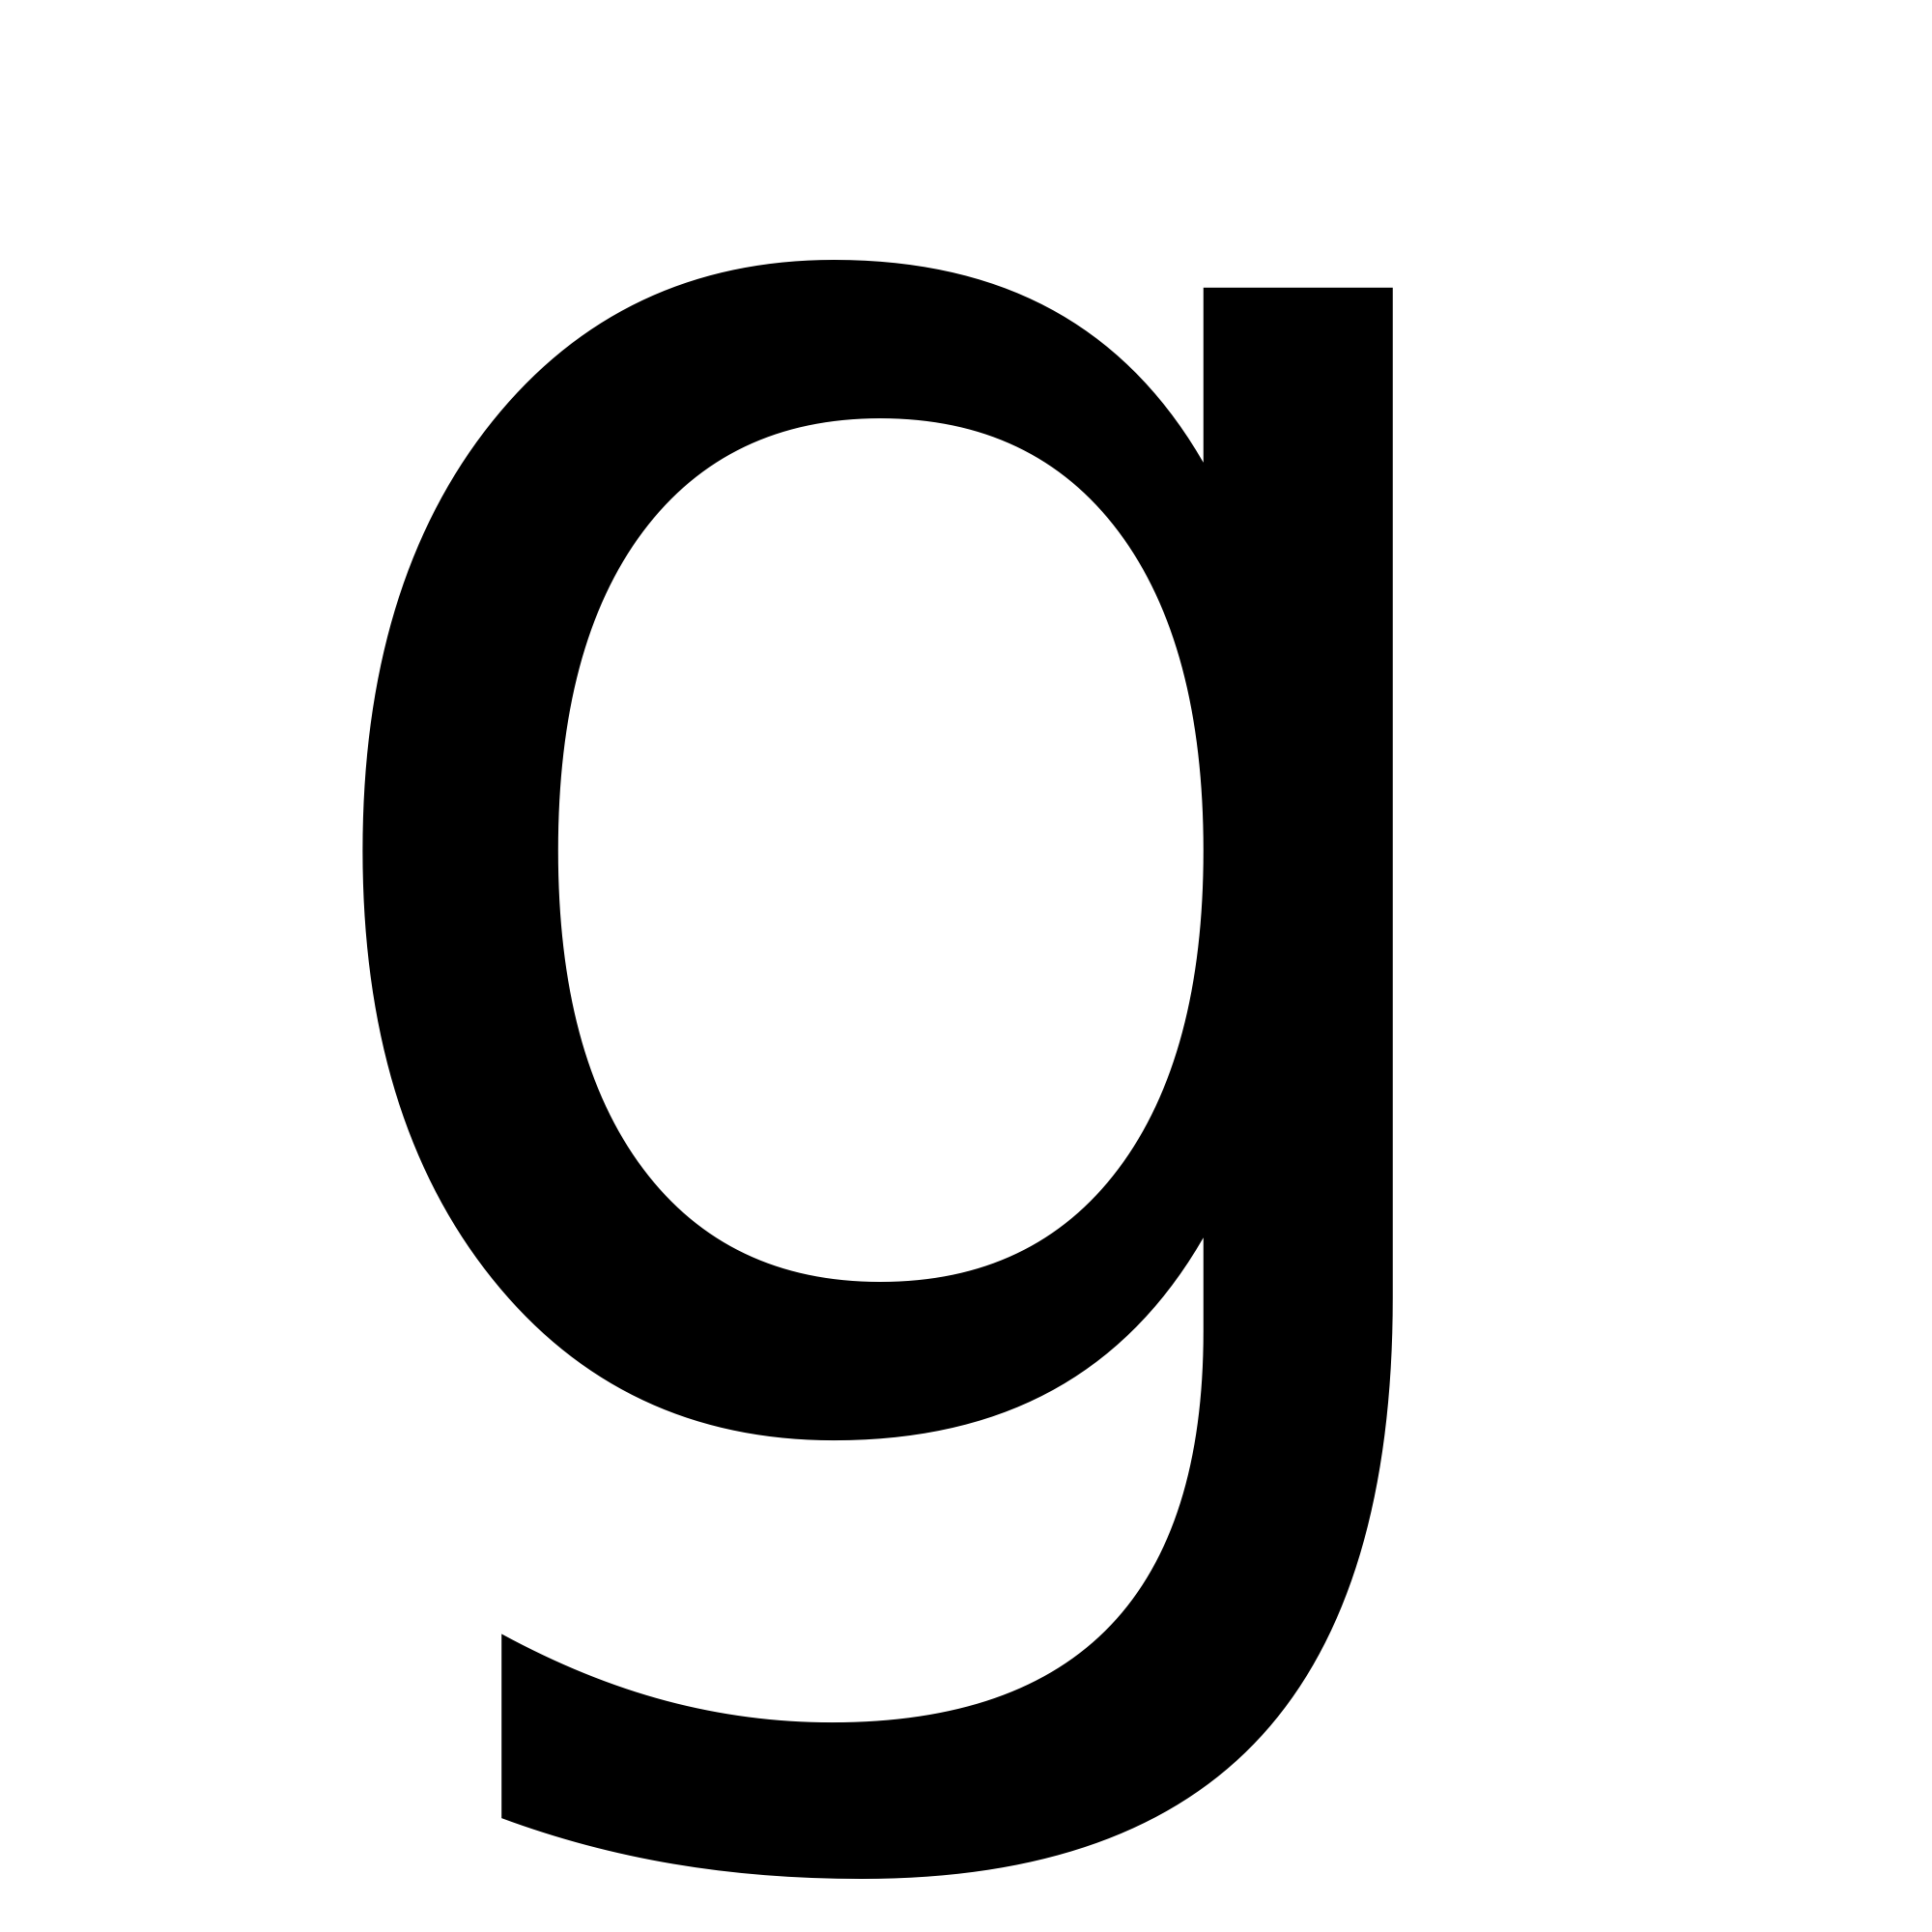 Lower Case Letters Blue and Silver Logo - letter g png.fullring.co